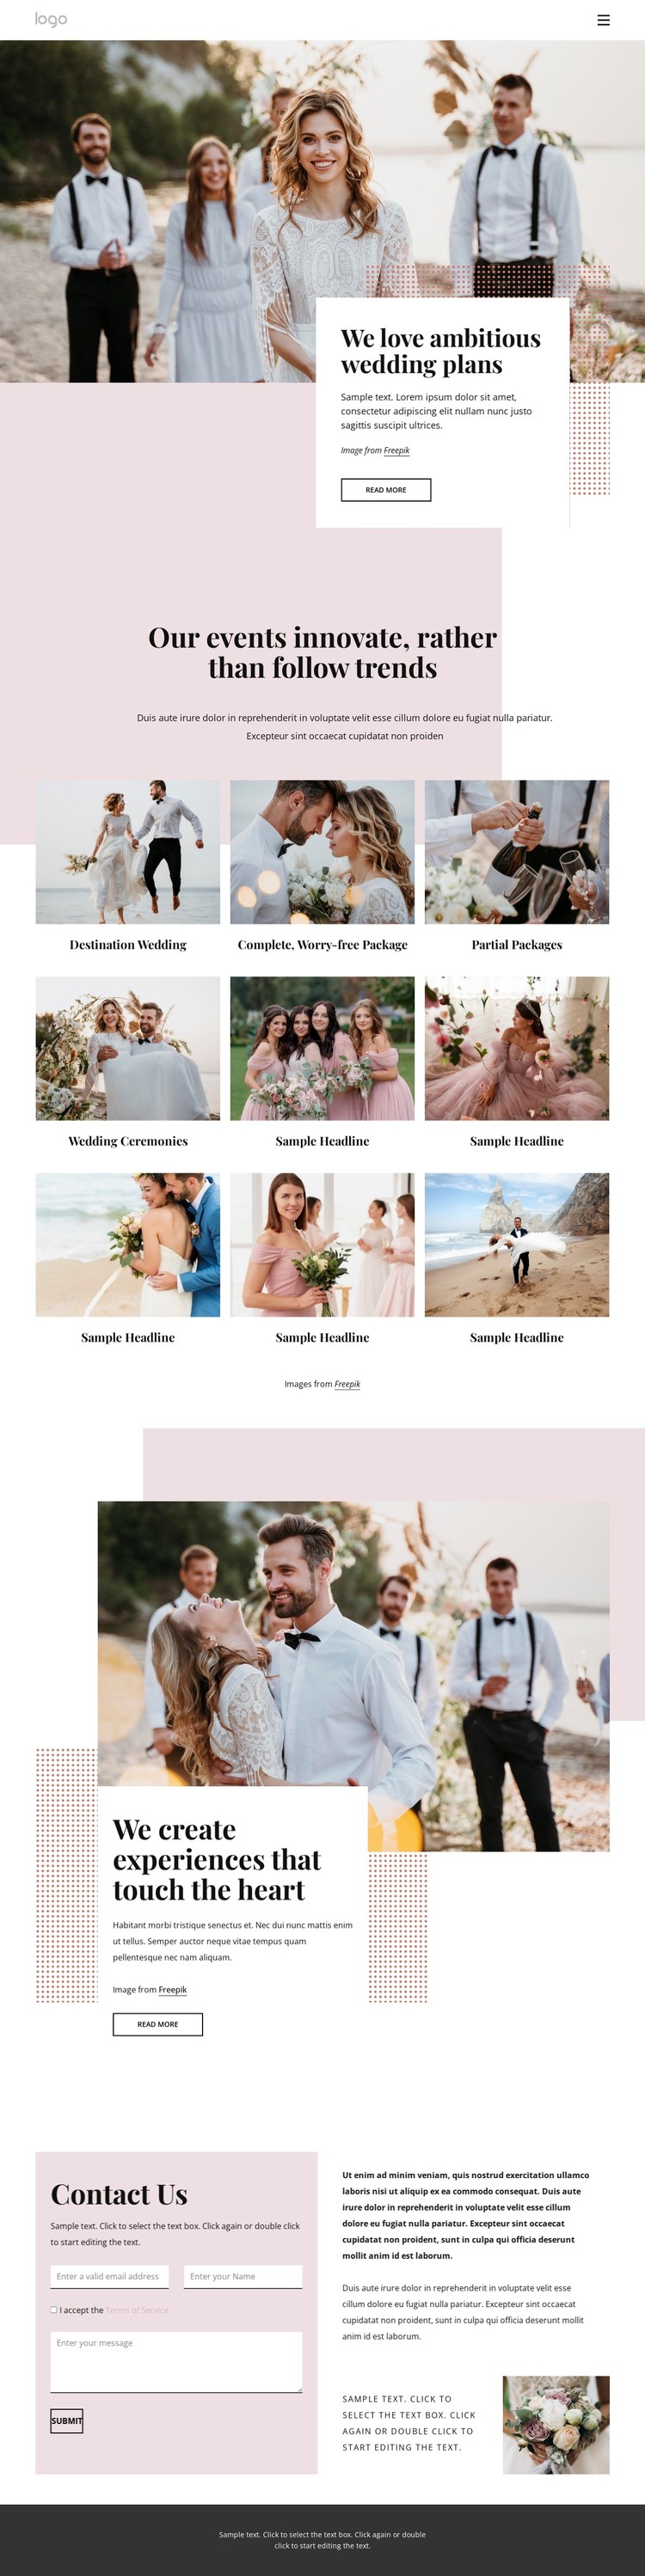 We love ambitious wedding plans CSS Template